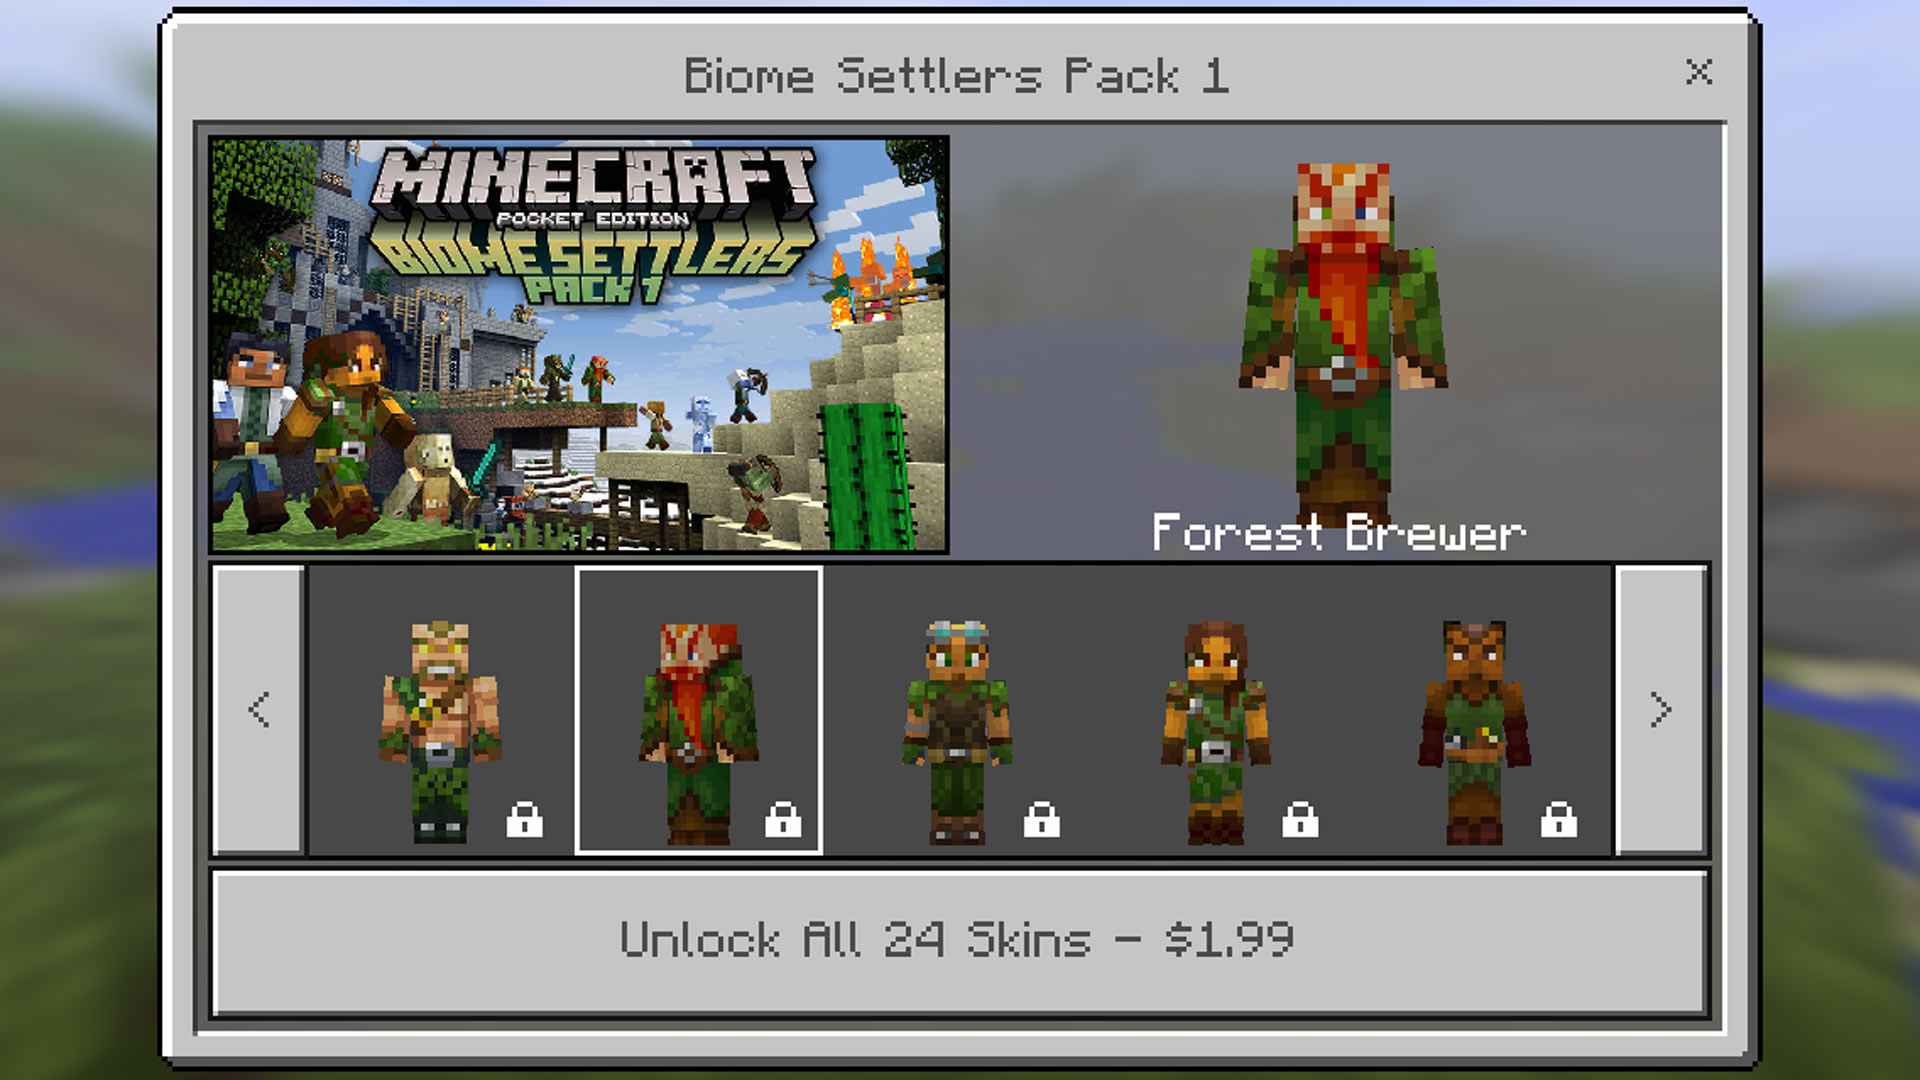 Minecraft Pocket Edition: Biome Settlers Skin Pack